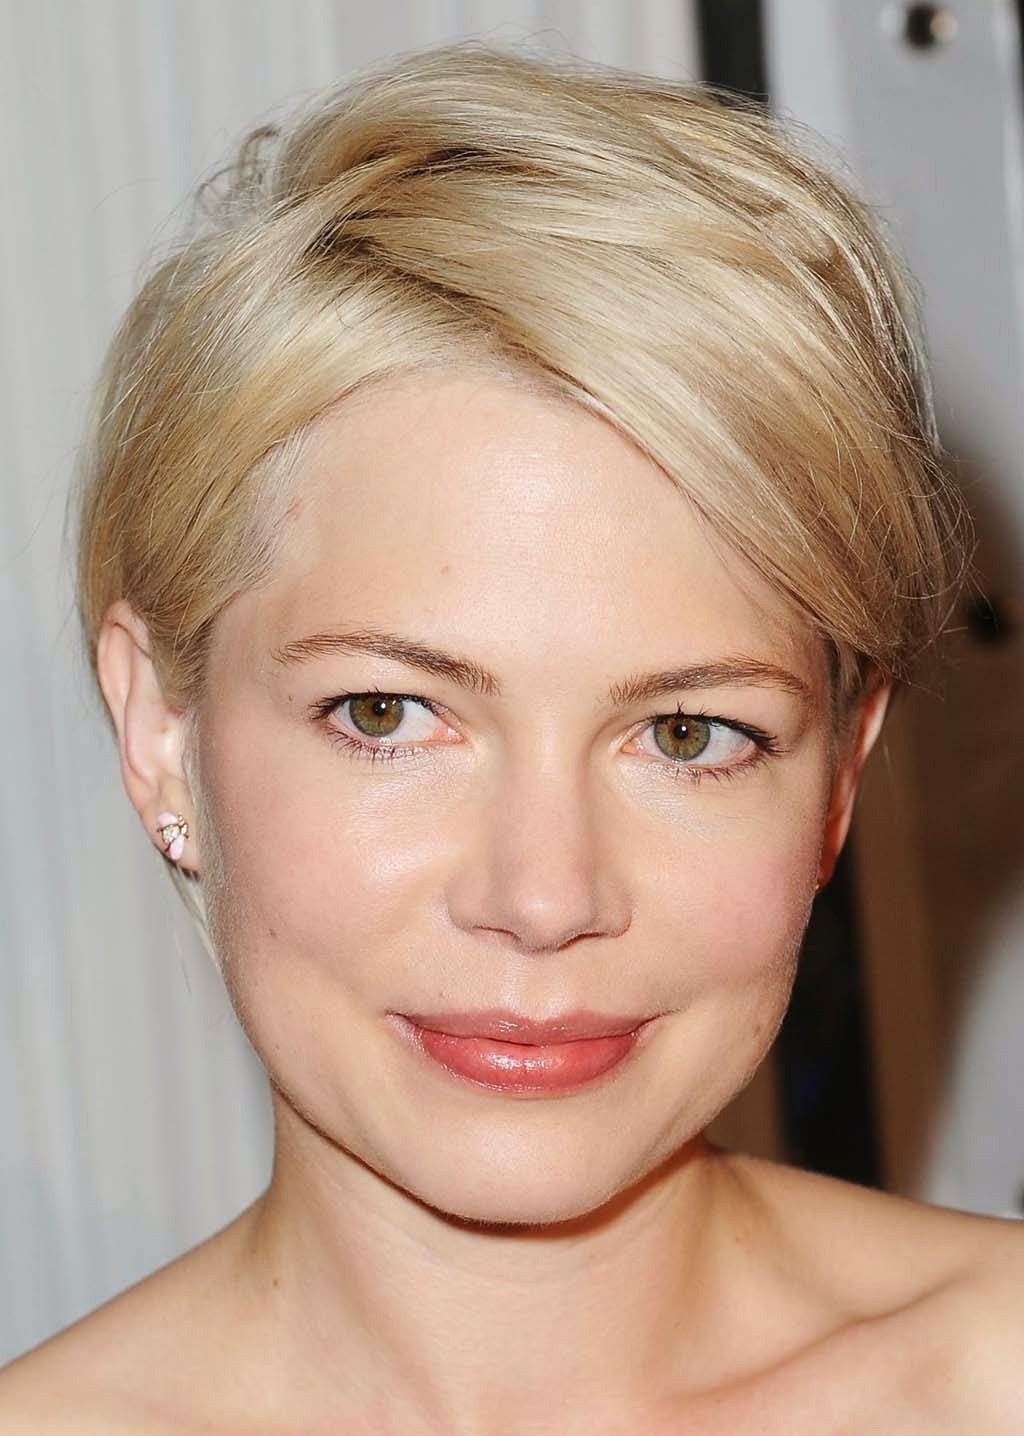 Short Cool Hairstyles
 Superb Hairstyle Short Cool Hairstyles for Round Faces